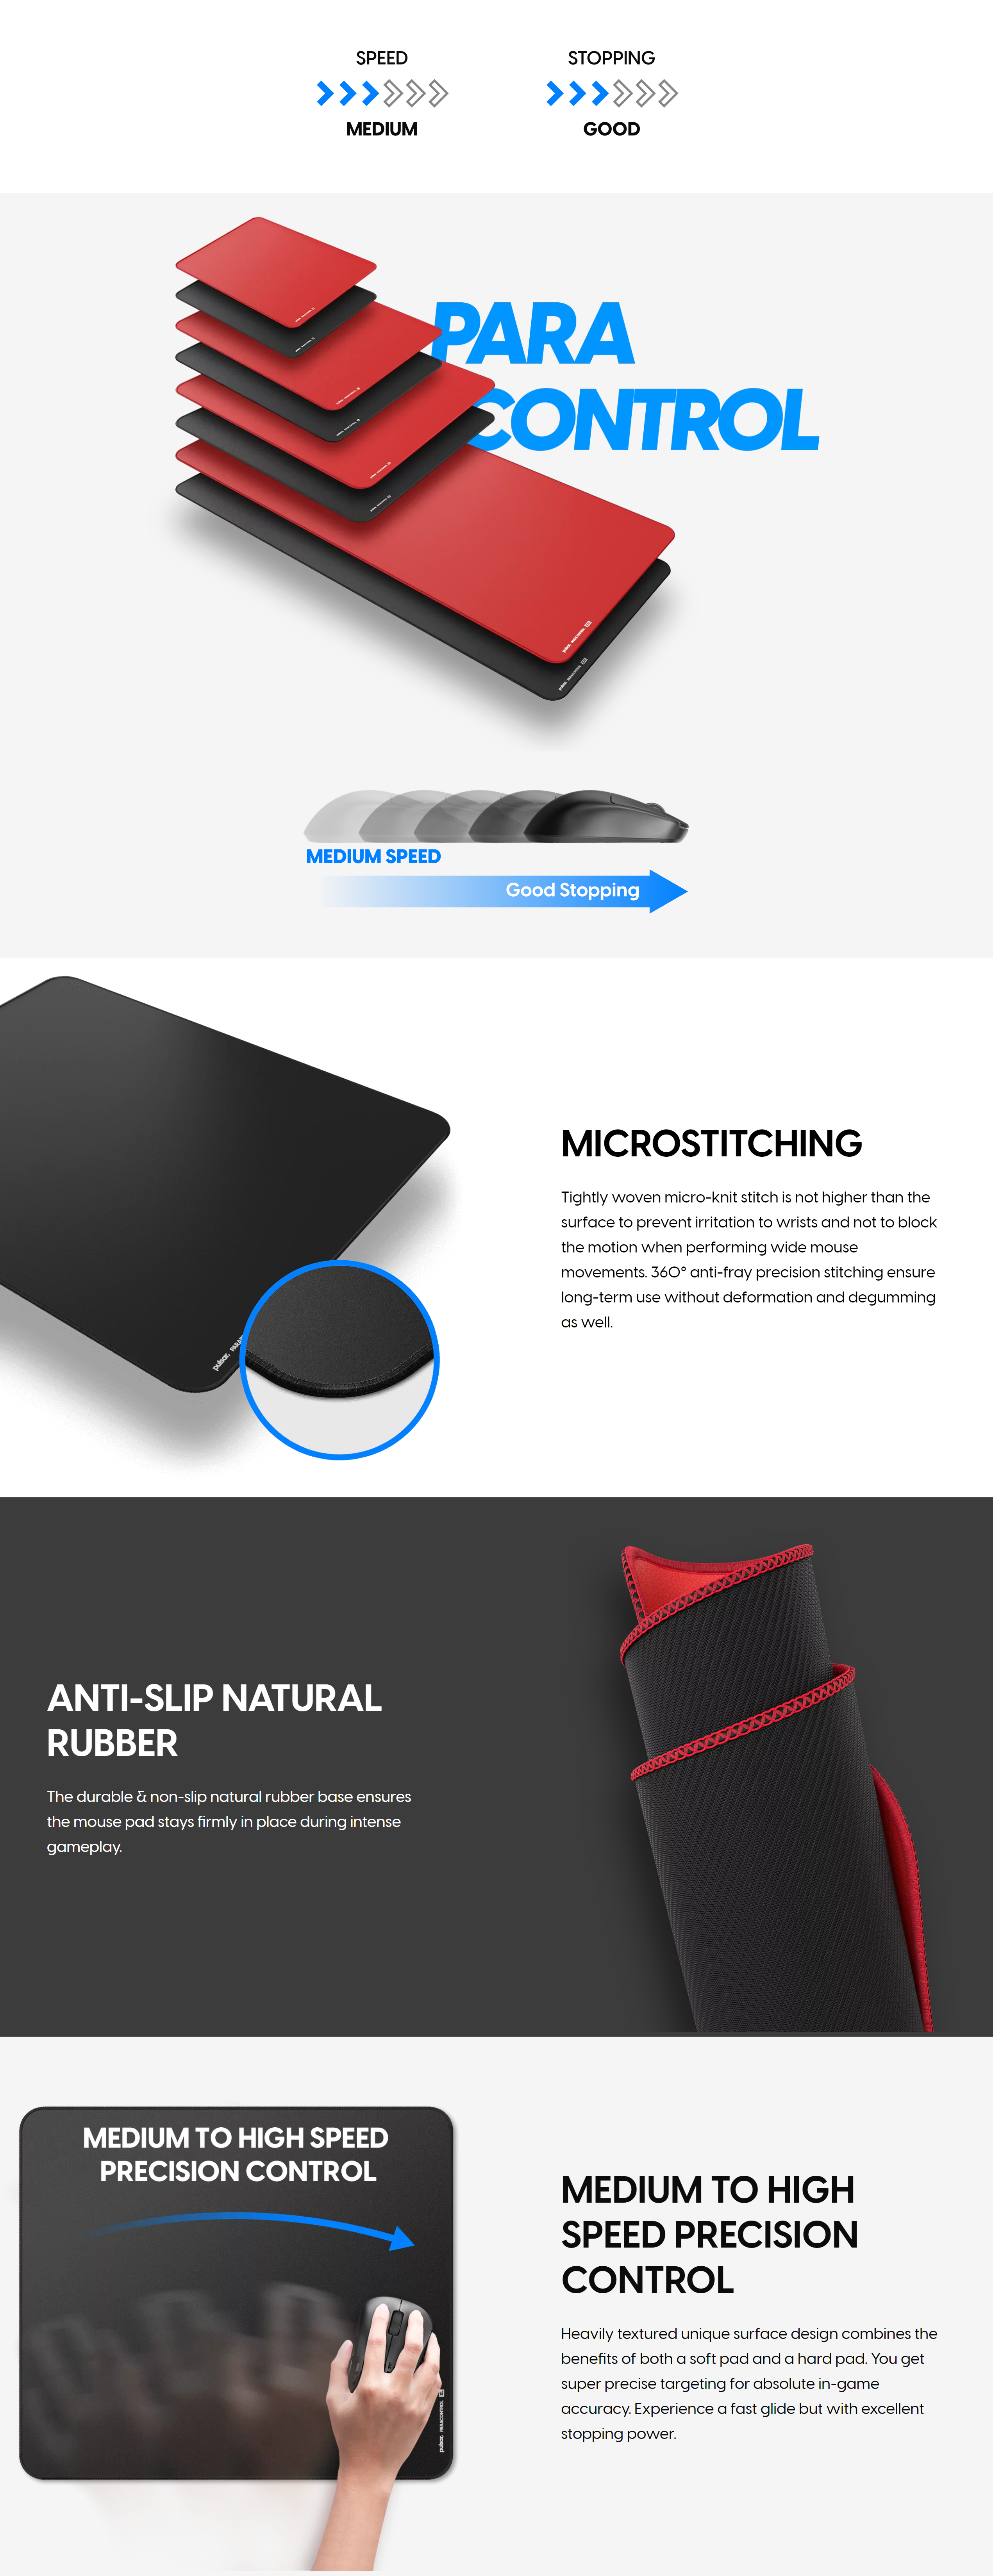 A large marketing image providing additional information about the product Pulsar Paracontrol V2 Mousepad Medium - Red - Additional alt info not provided